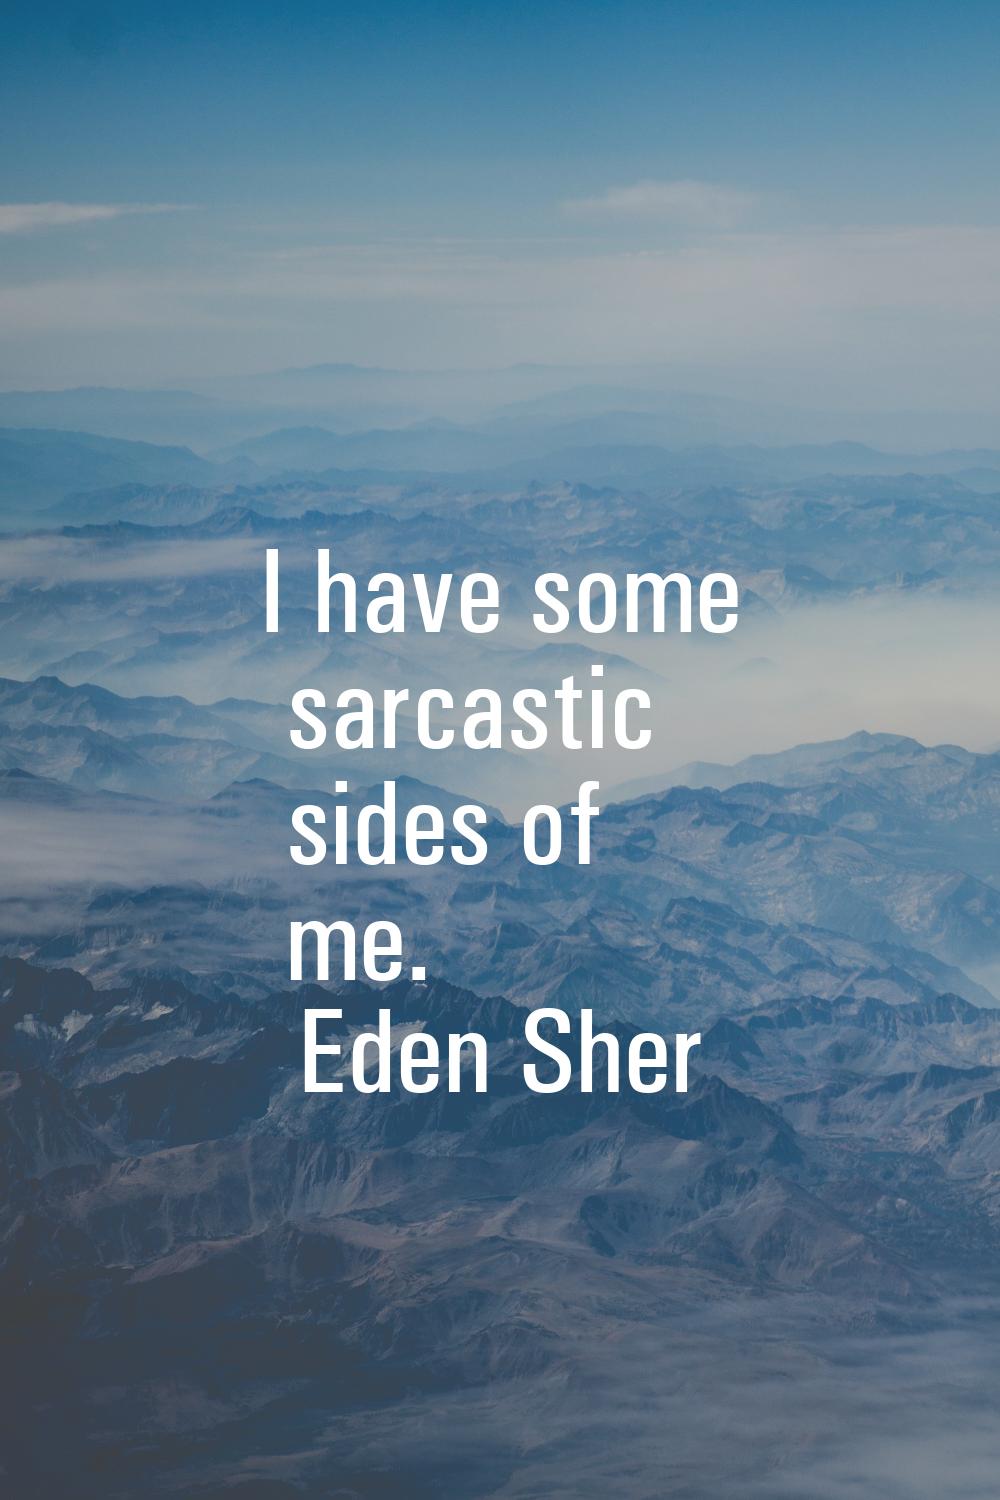 I have some sarcastic sides of me.